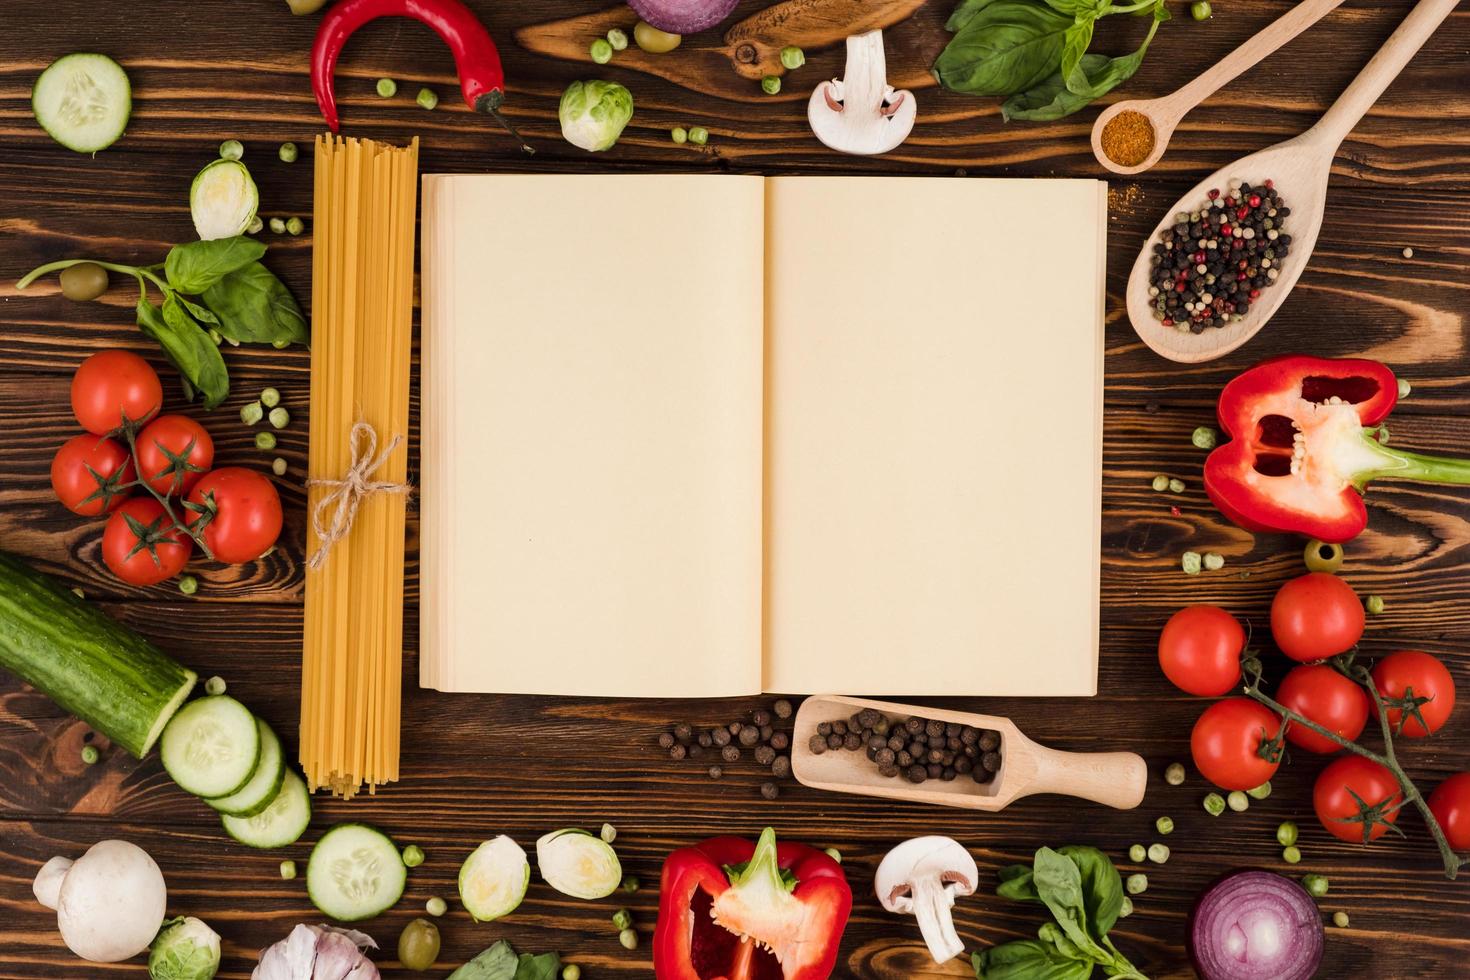 https://static.vecteezy.com/system/resources/previews/003/491/643/non_2x/a-recipe-book-is-opened-on-a-wooden-table-with-ingredients-for-italian-dishes-laid-out-free-photo.JPG